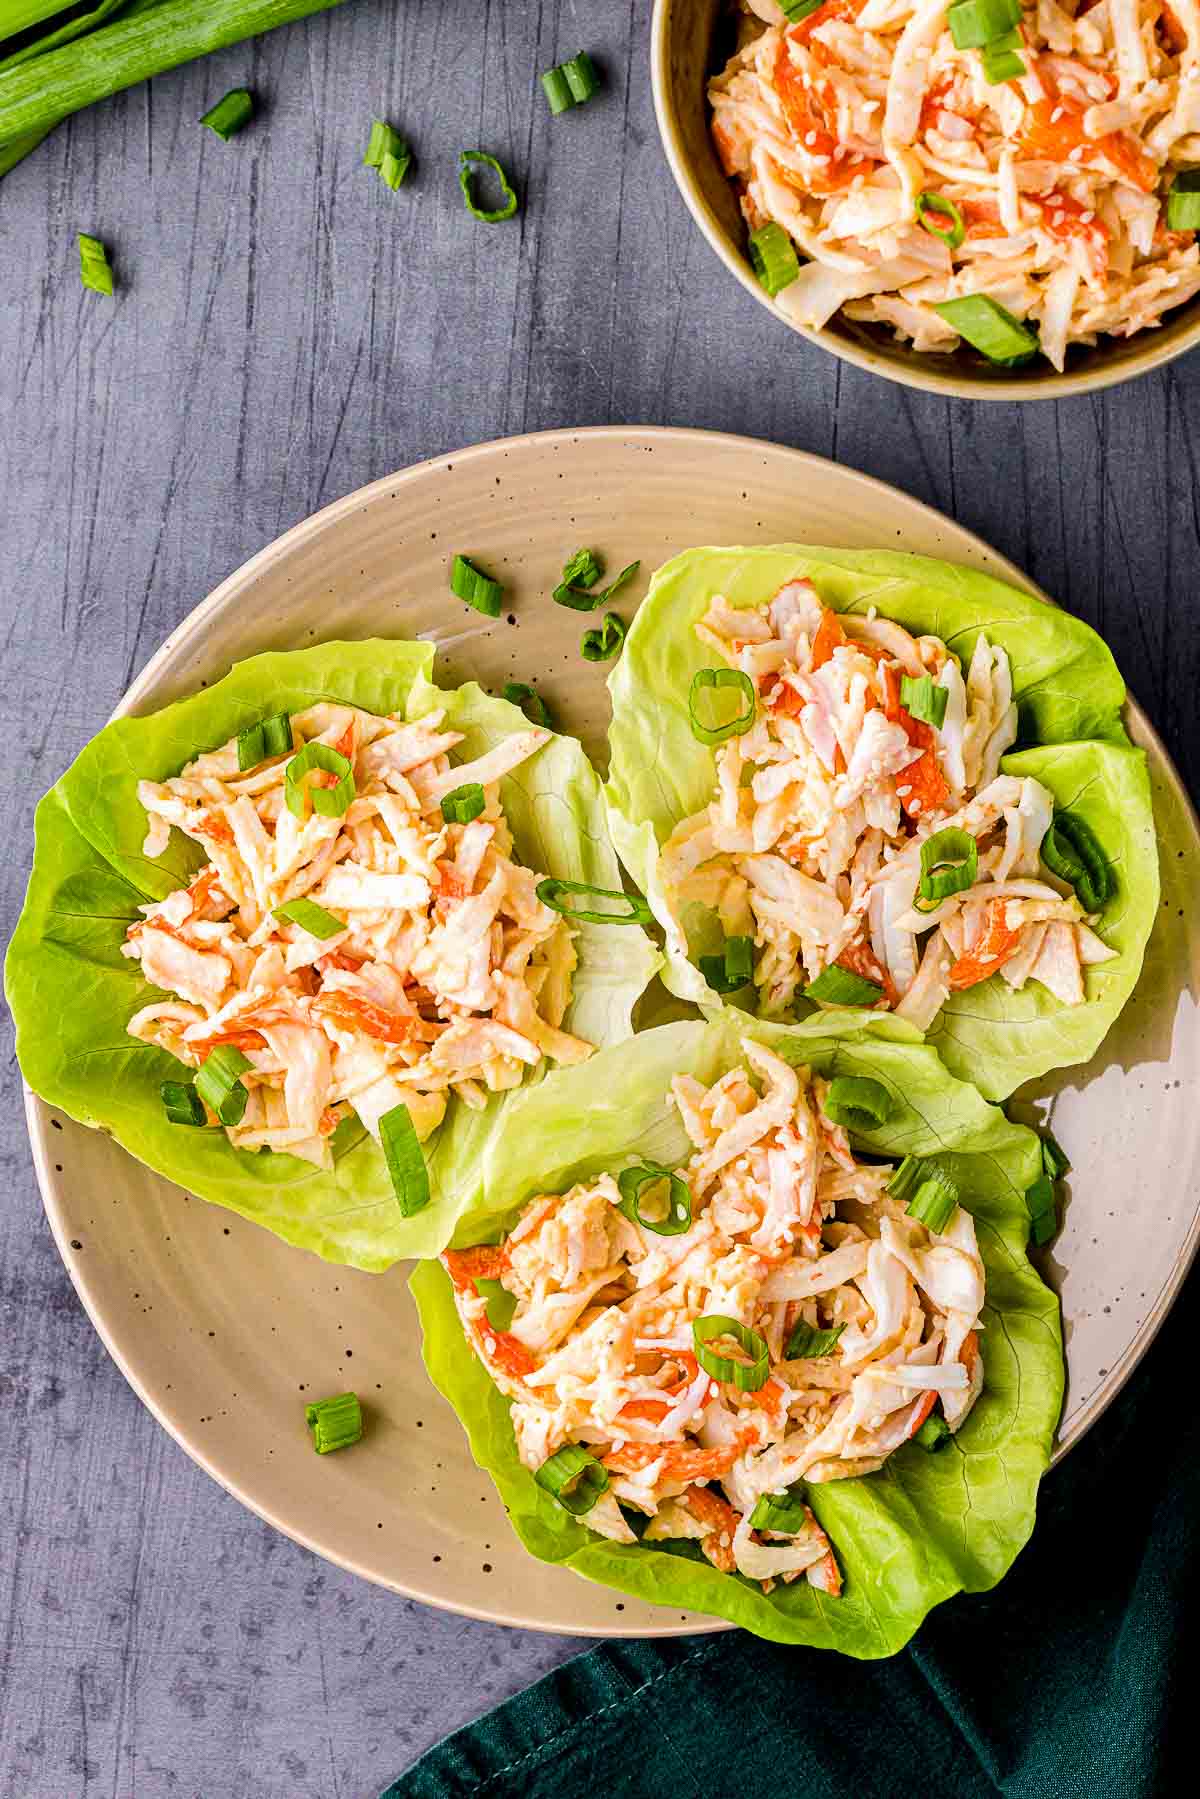 sushi crab salad in lettuce cups for wraps